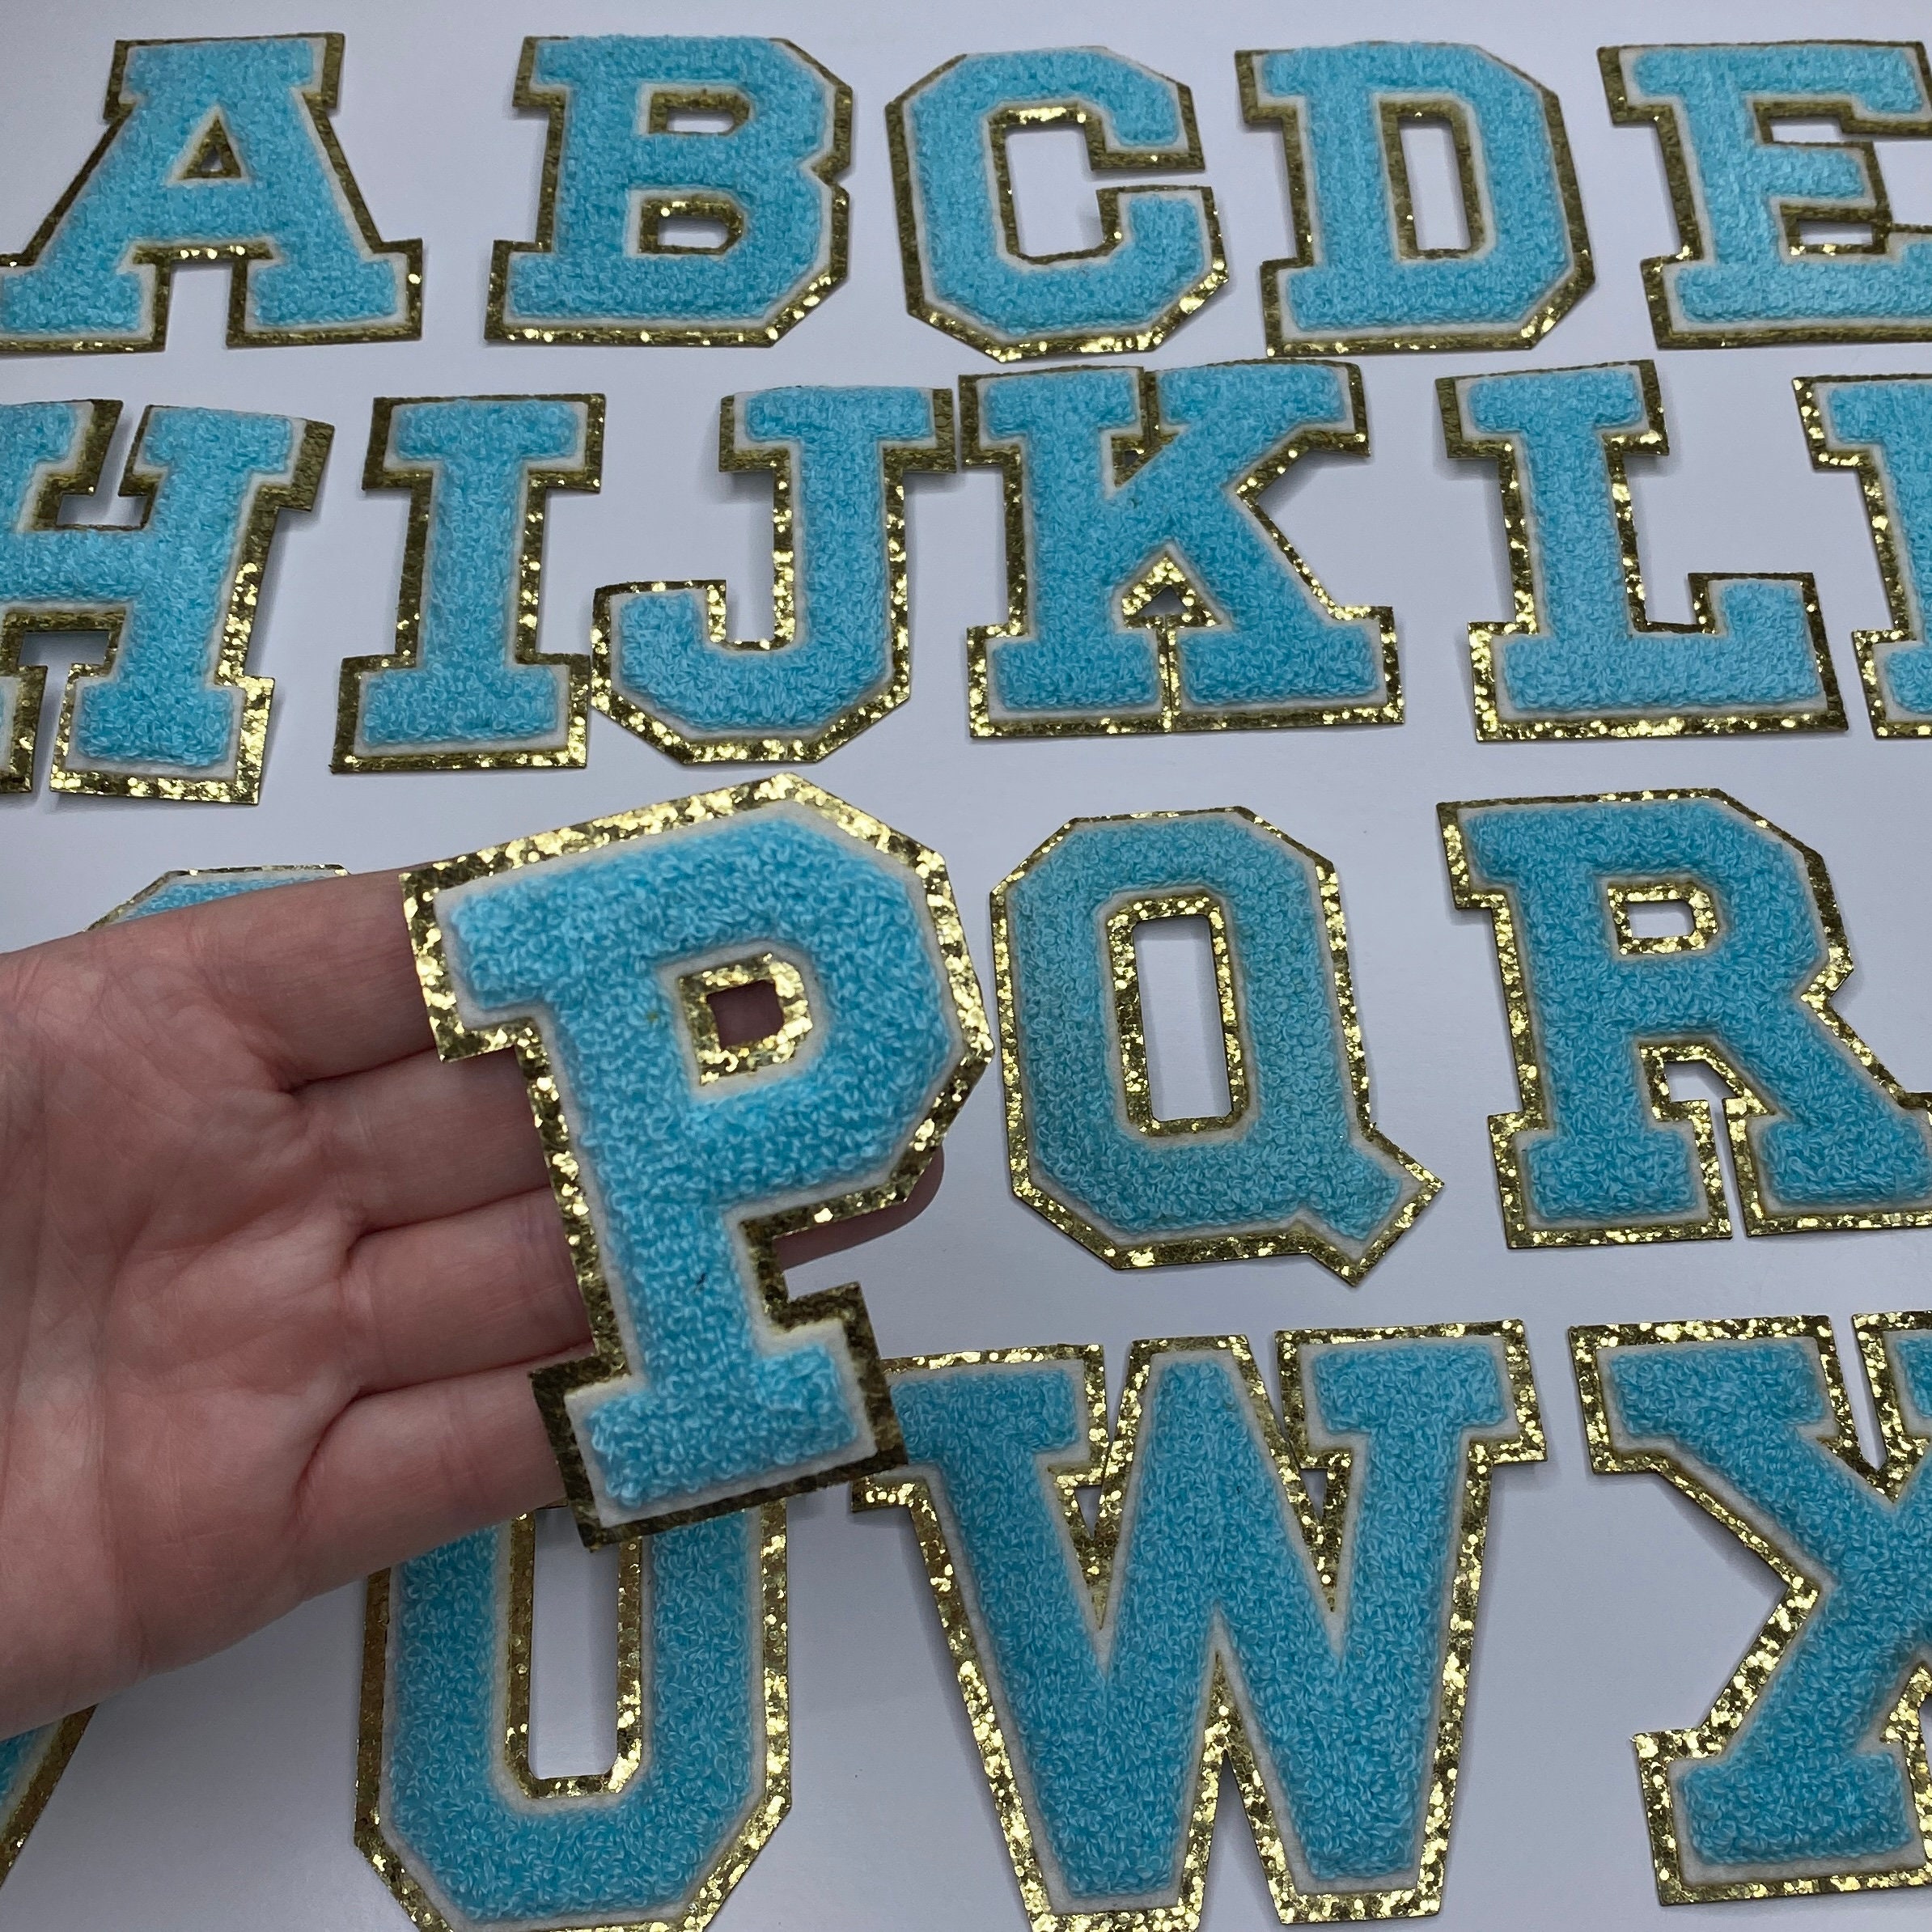 Jolee's Iron-On Letters 1.5-Turquoise